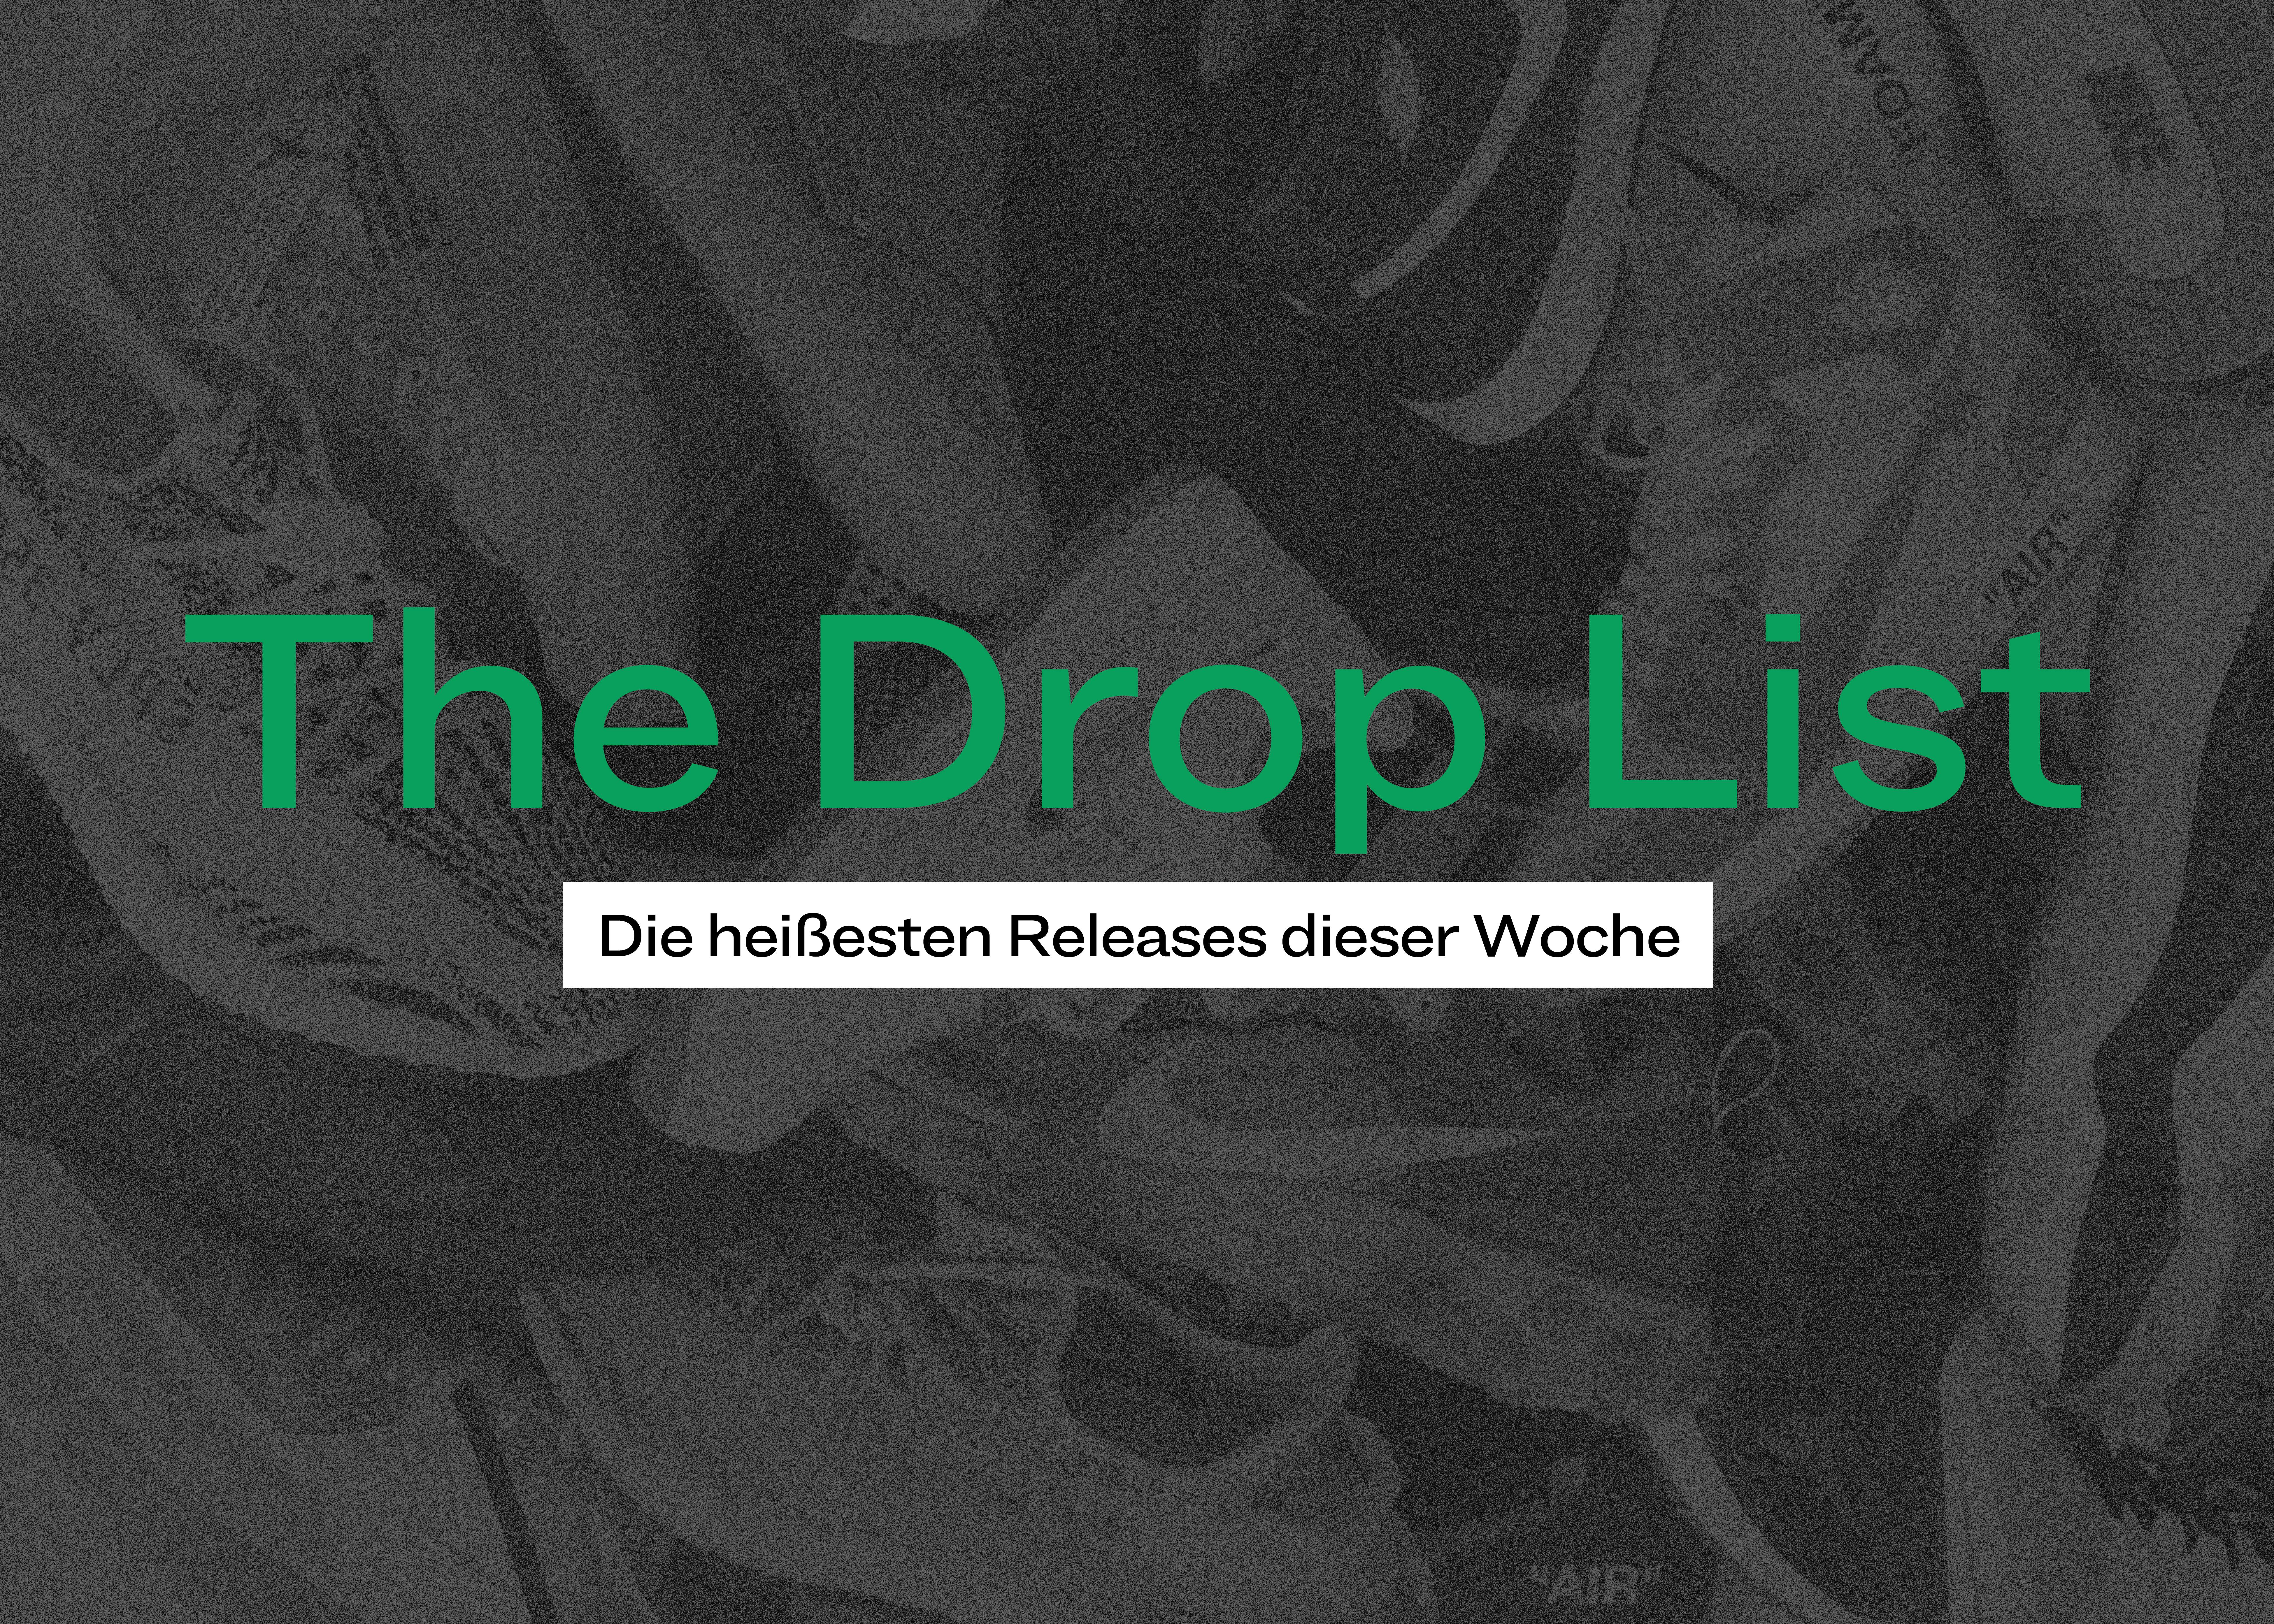 The Drop List - German feature image